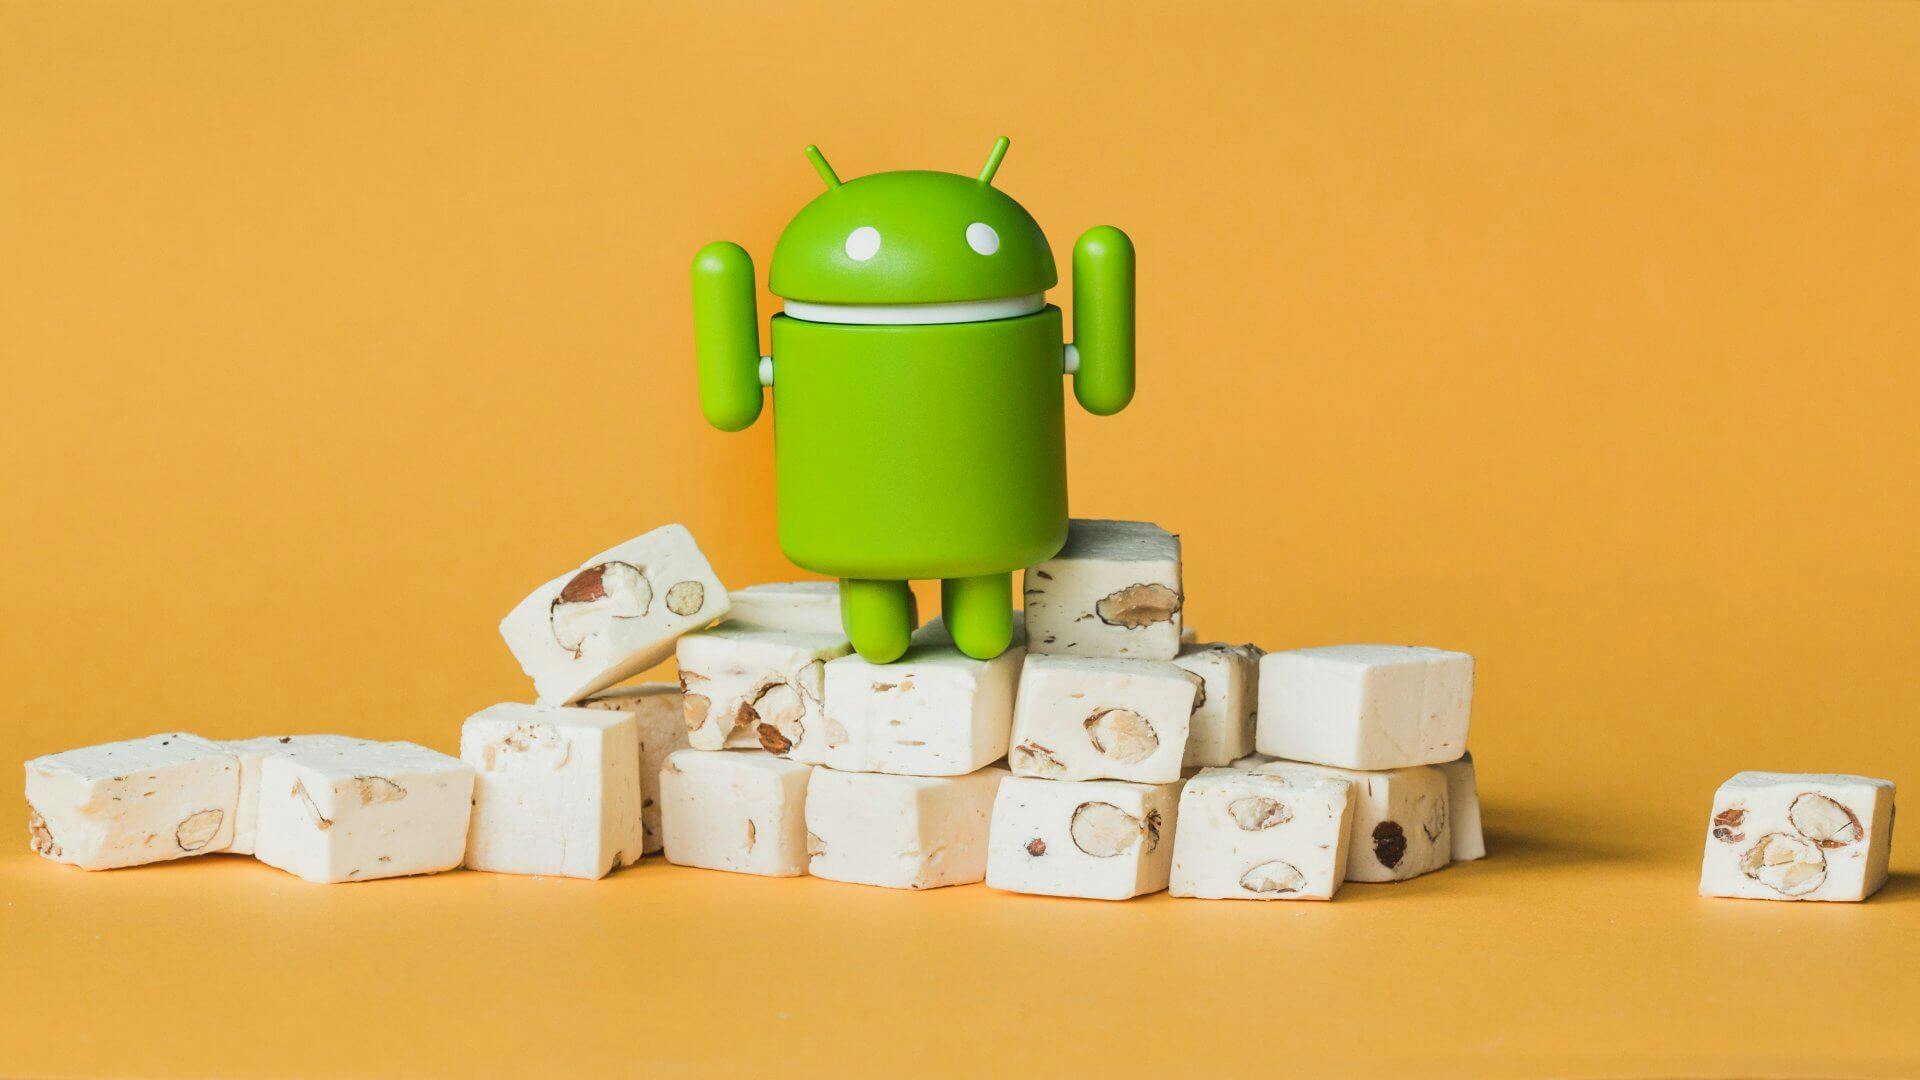 Reasons To Upgrade Your Device To Android Nougat 7.0 featured image